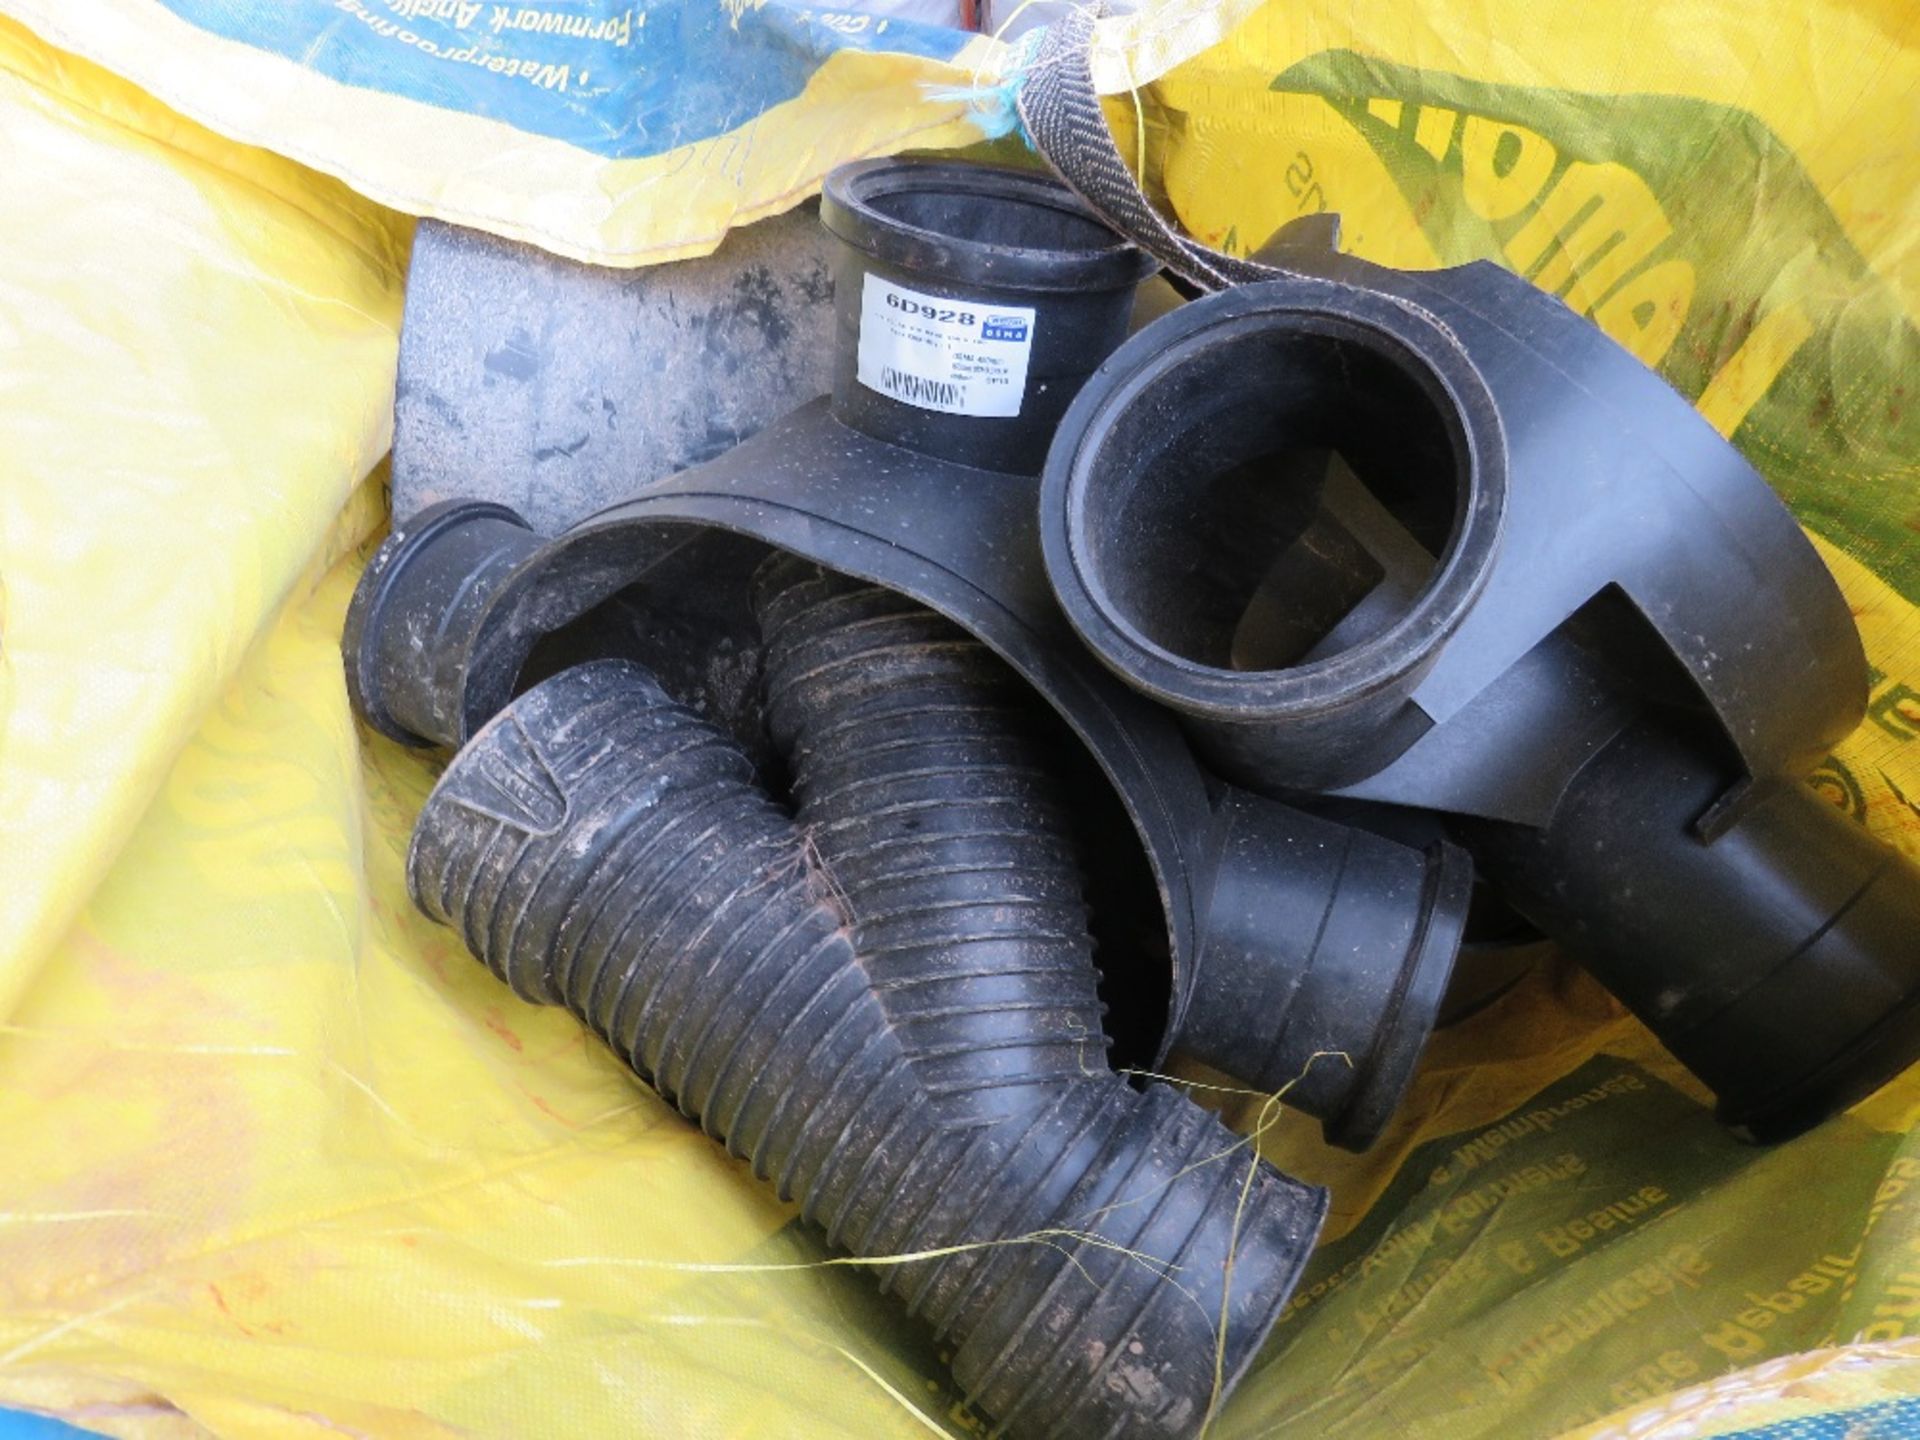 2 X BULK BAGS CONTAINING ASSORTED BLACK PLASTIC DRAINAGE FITTINGS AND MANHOLE PARTS. DIRECT FROM COM - Image 3 of 5